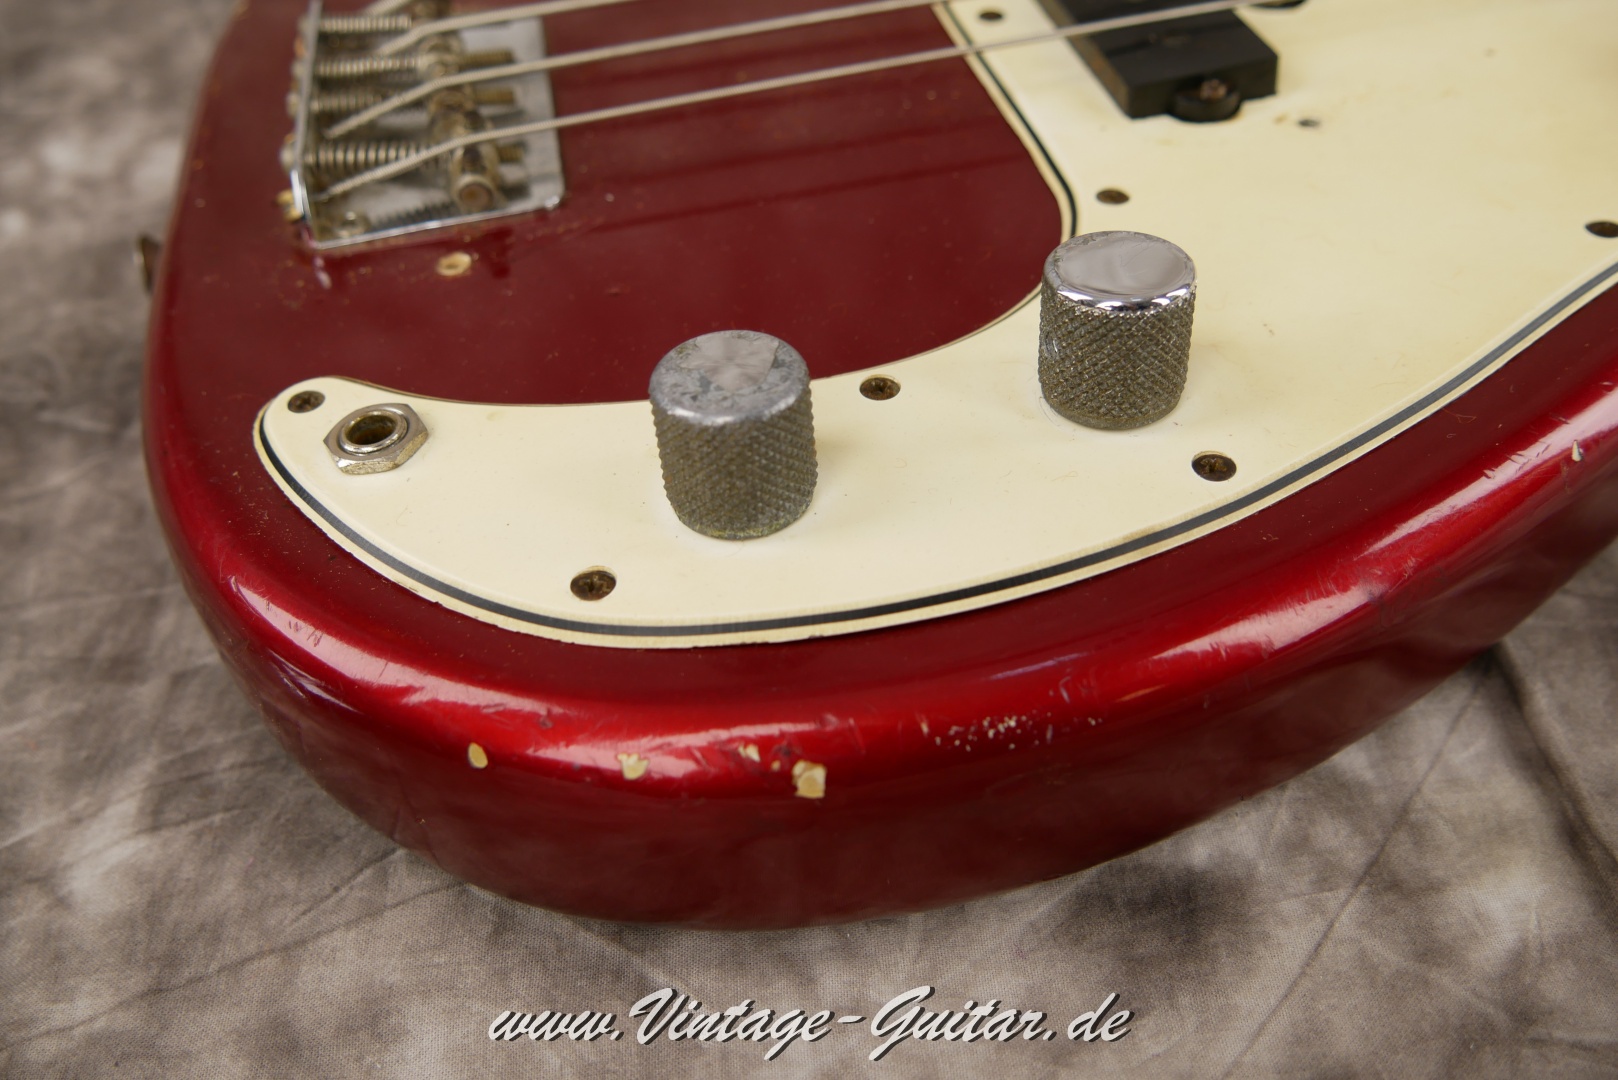 Fender-Precision-Bass-1963-candy-apple-red-021.JPG